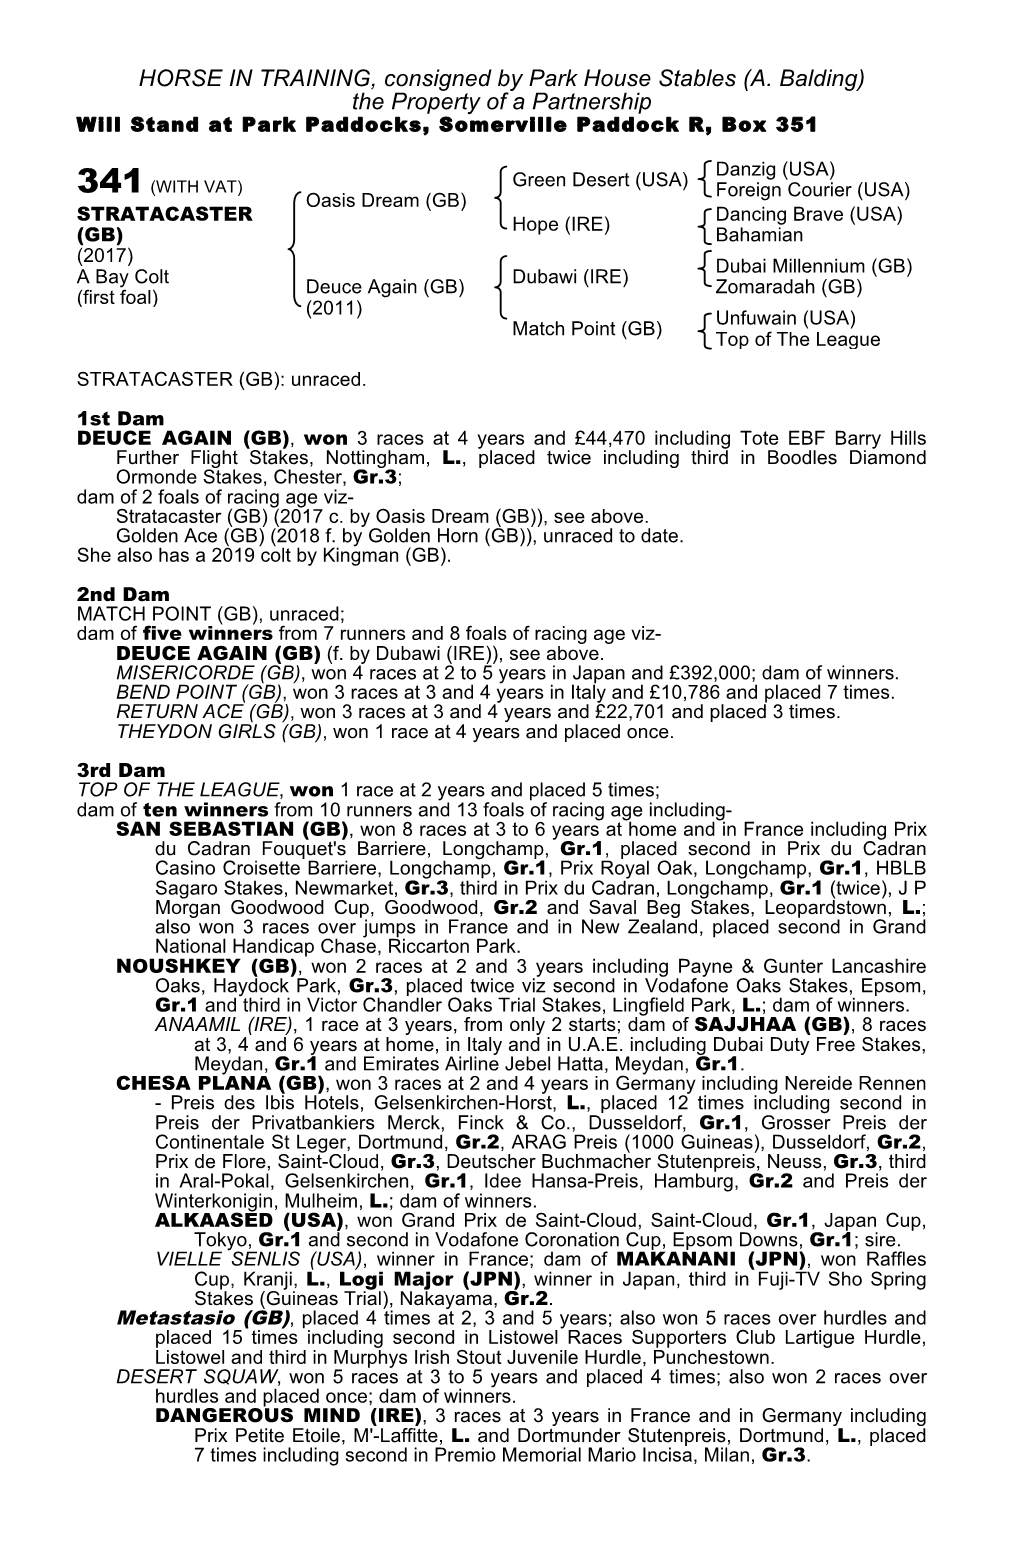 HORSE in TRAINING, Consigned by Park House Stables (A